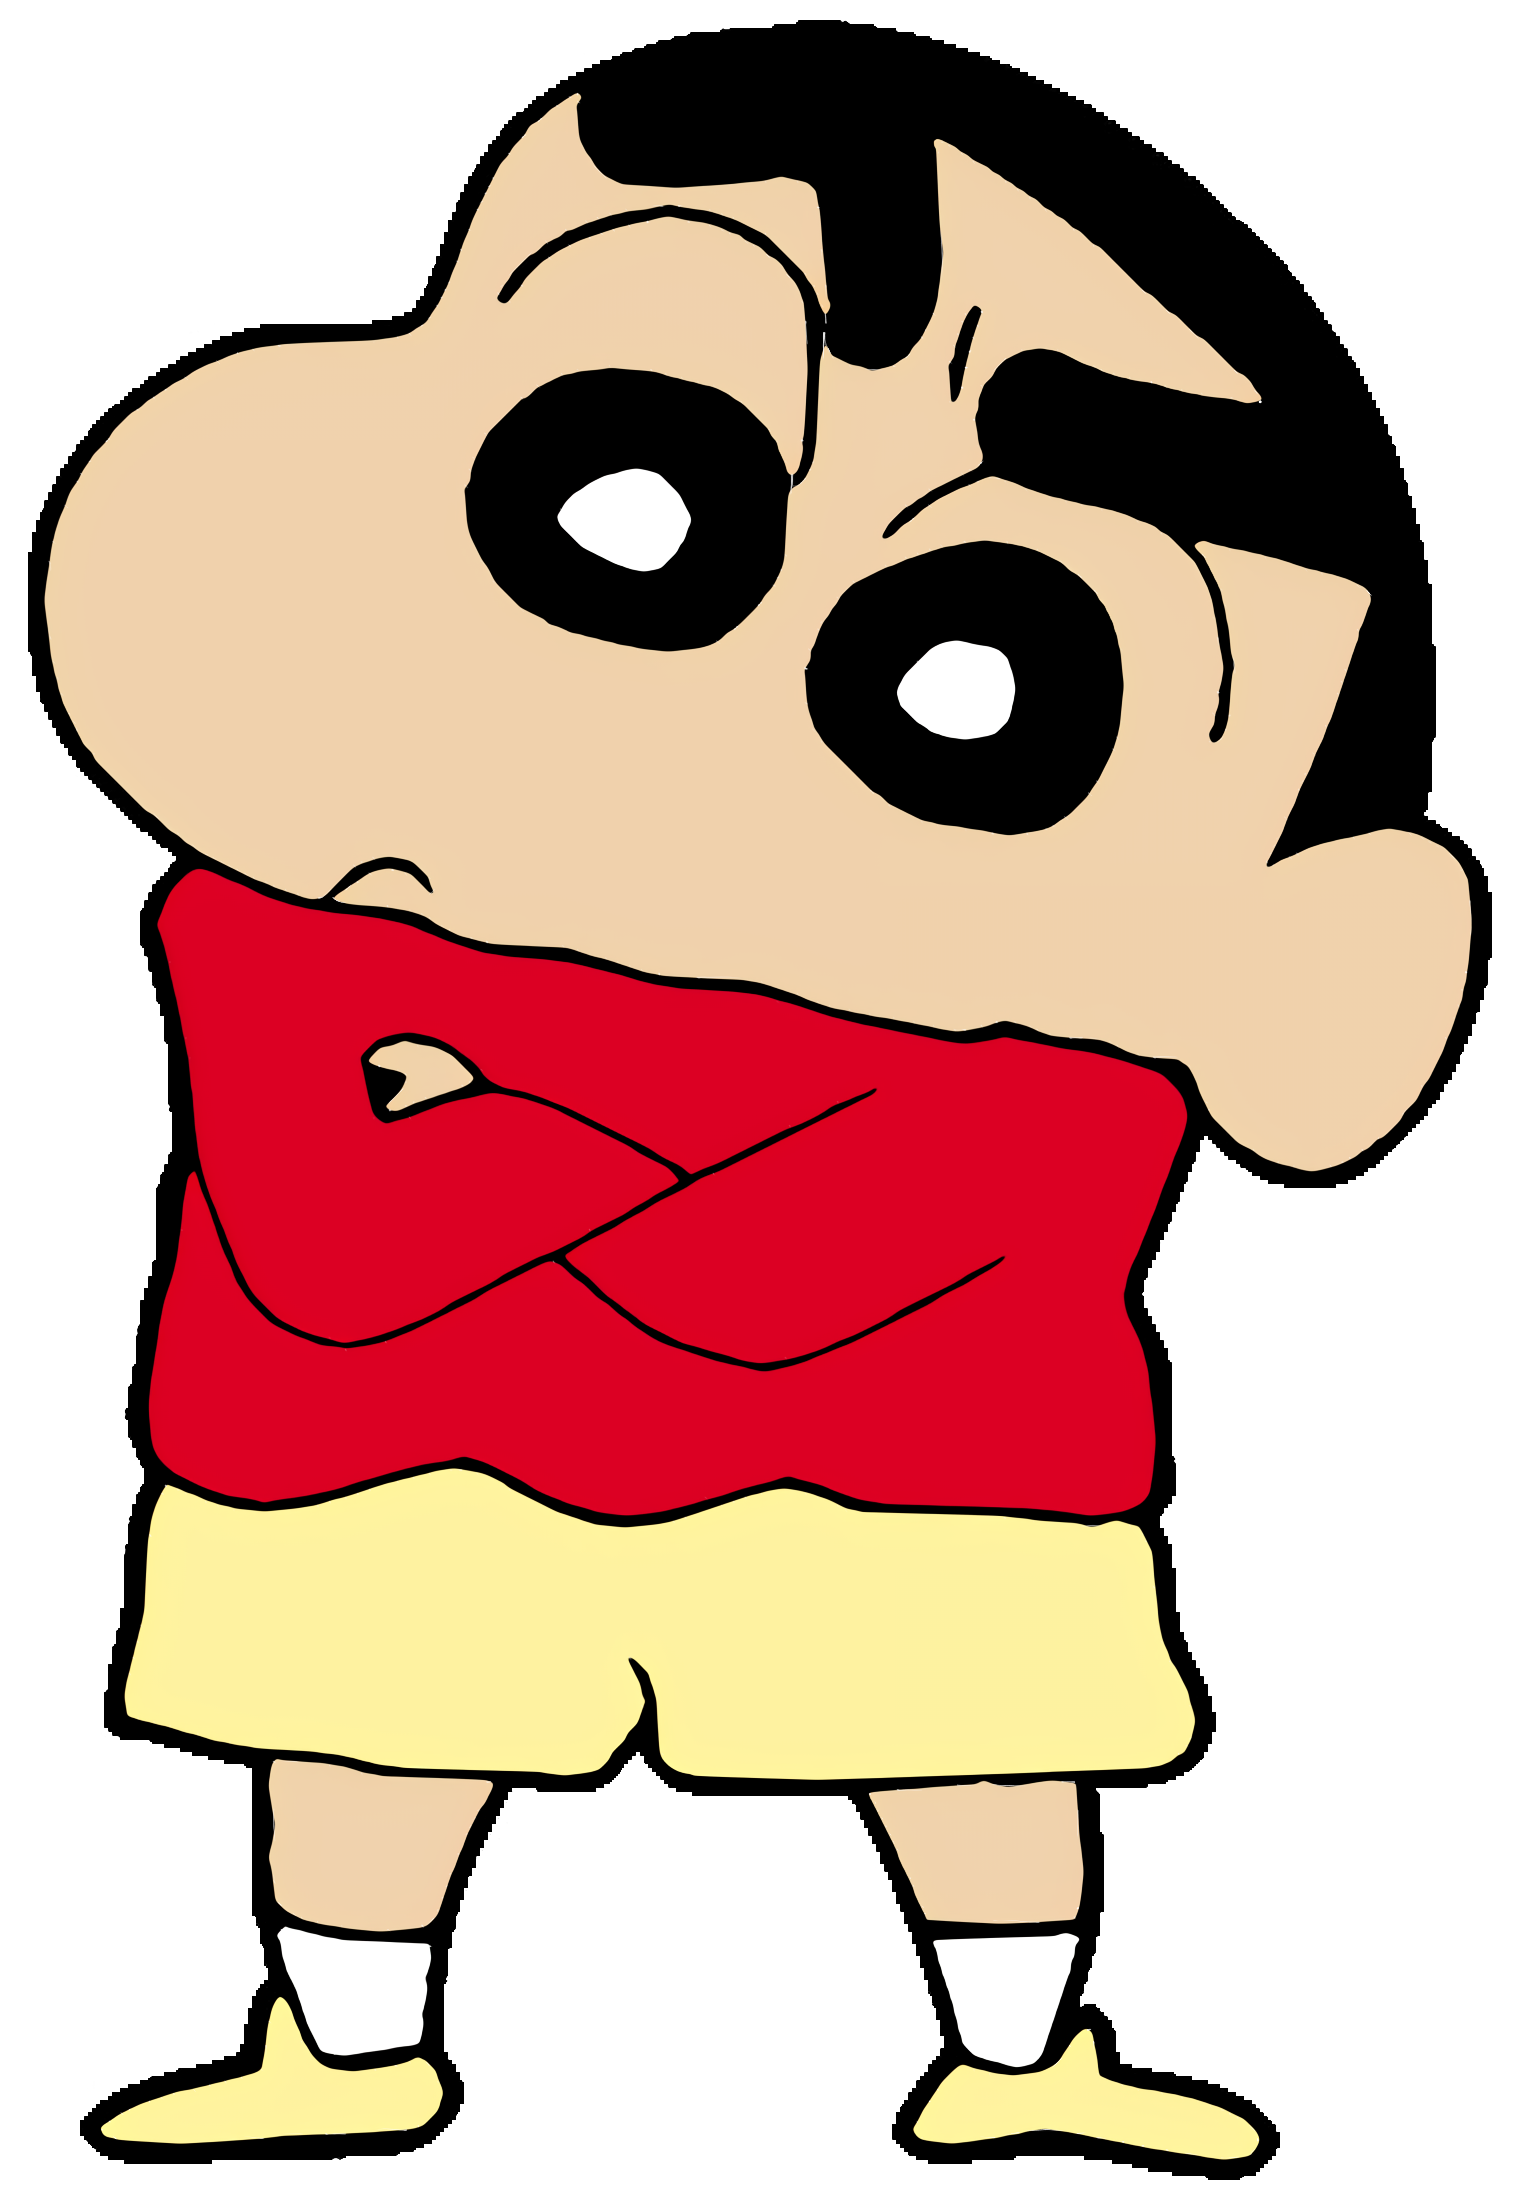 Crayon Shin-chan-Artwork by @By_D.W-Doodle